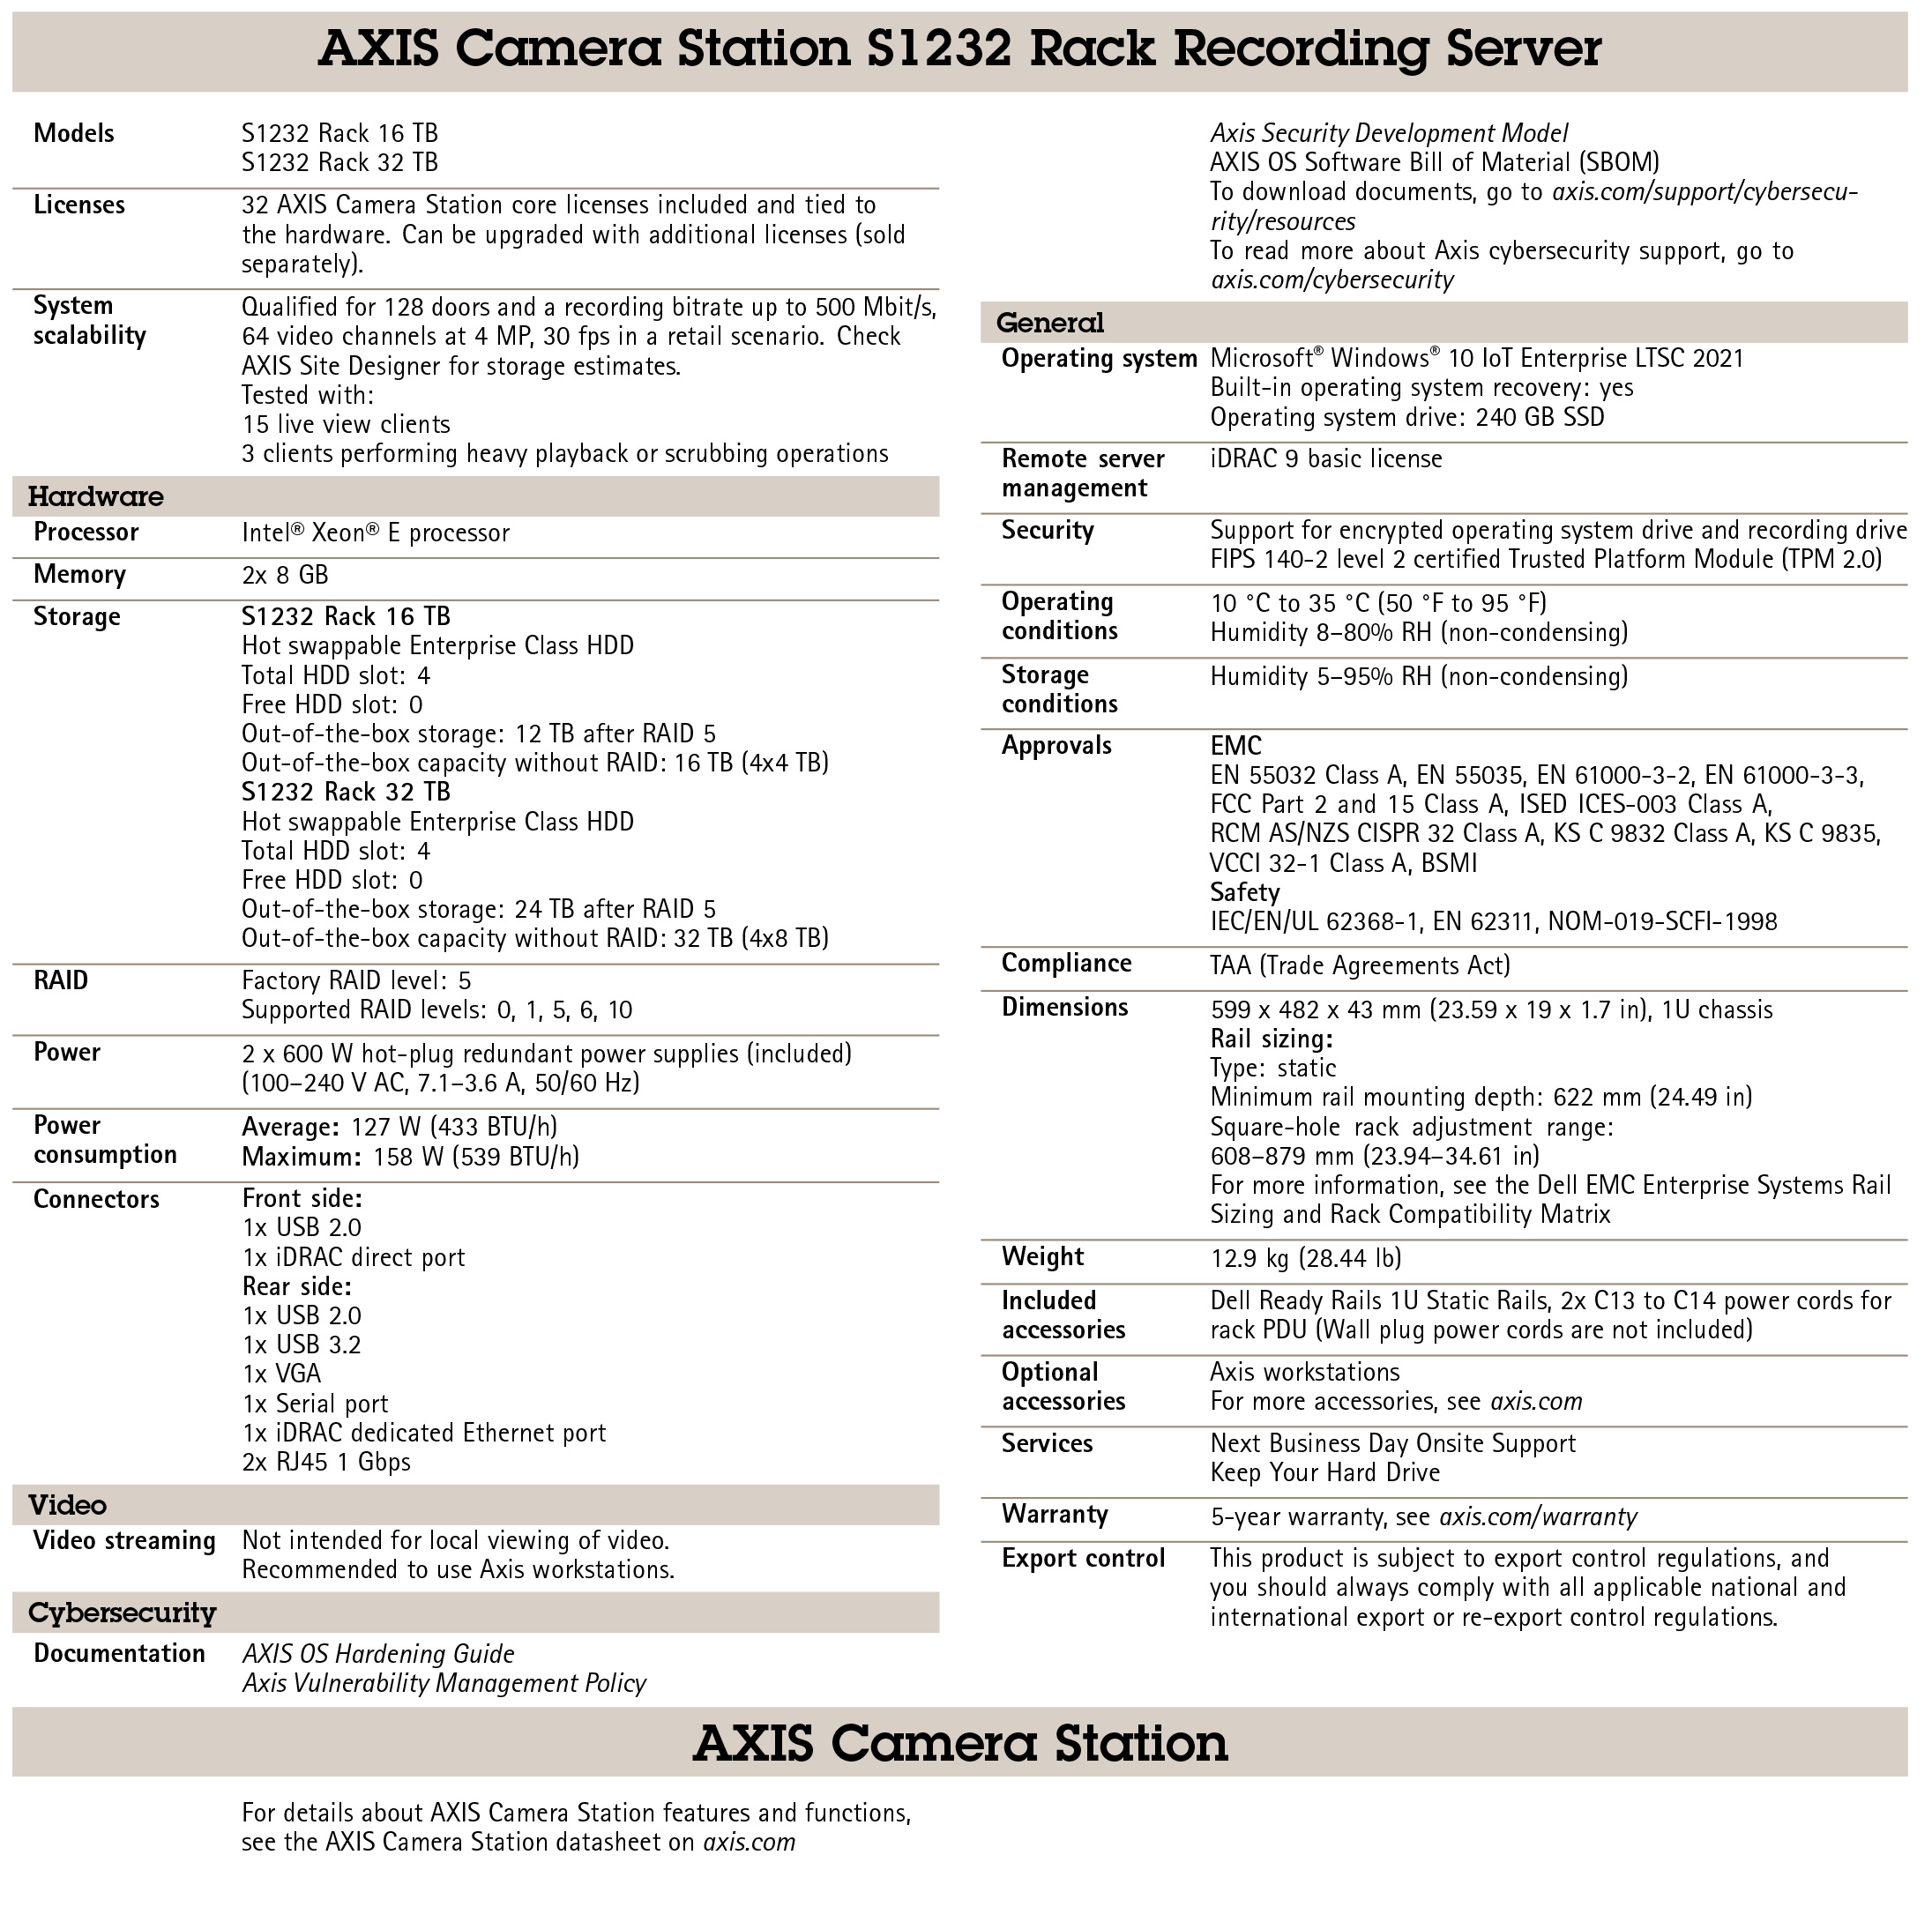 AXIS Camera Station S1232 Rack Recording Server